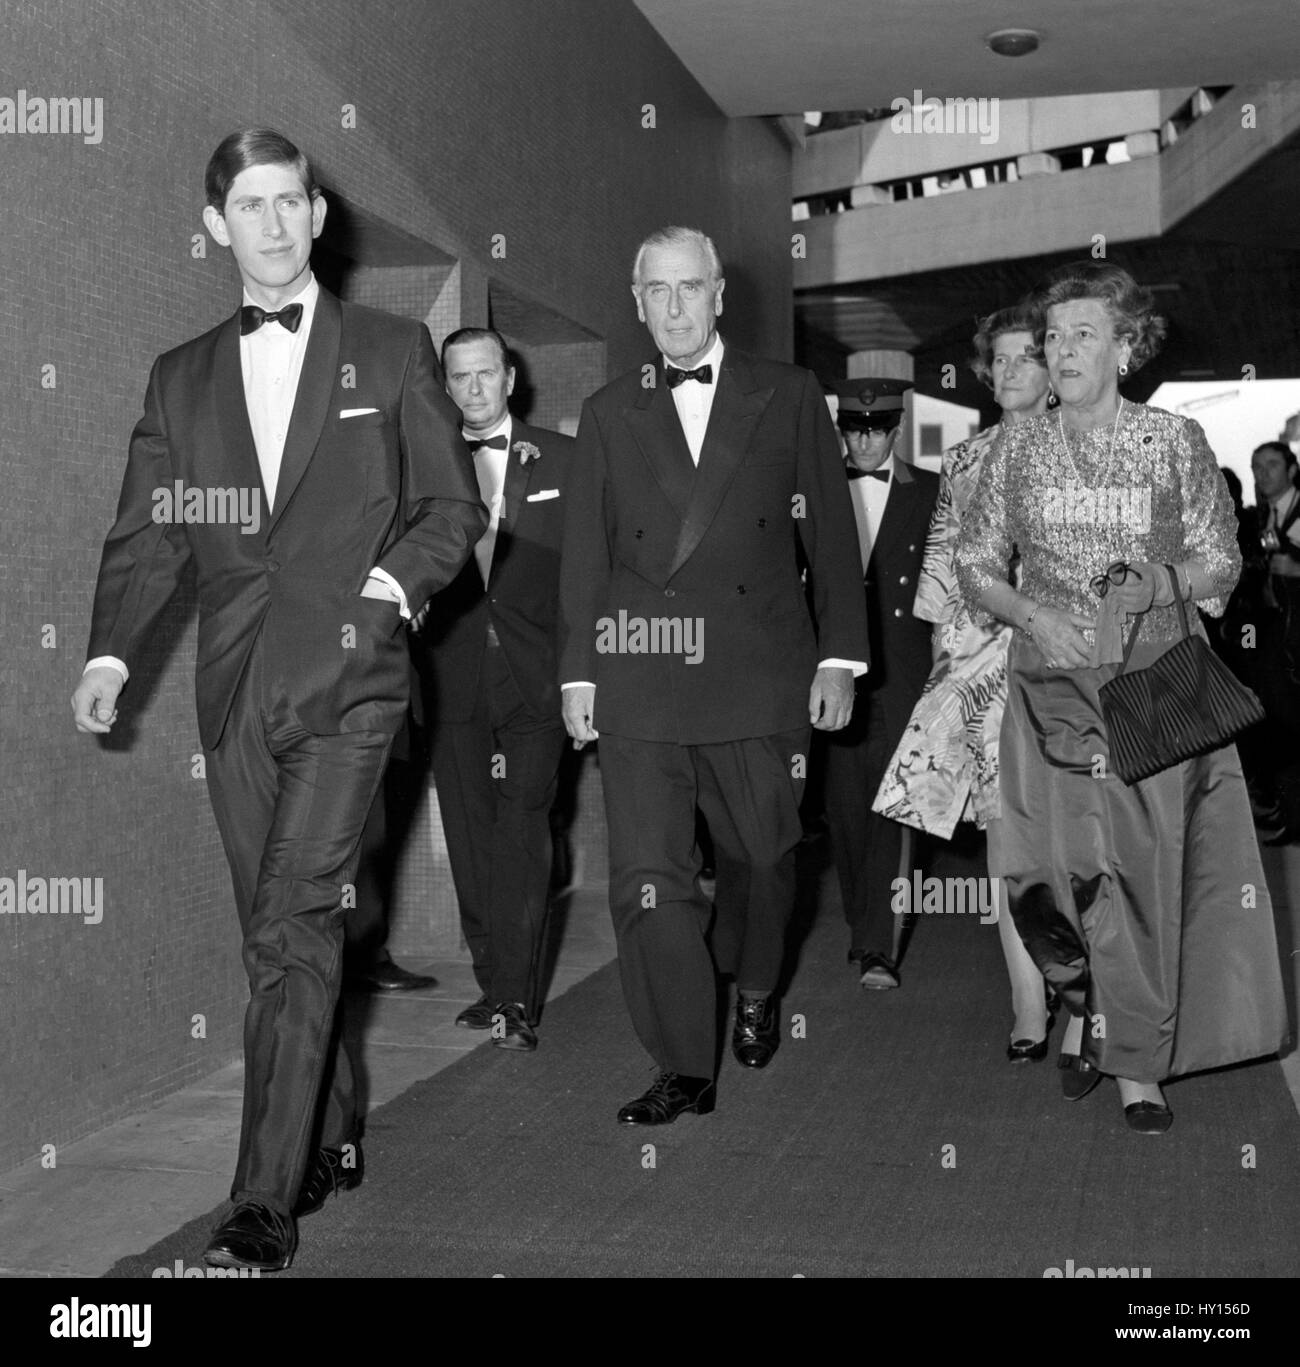 Back from his engagements in Wales, Prince Charles is seen arriving at the Royal Festival Hall, London, with Admiral of the Fleet Earl Mountbatten of Burma. They were attending a royal occasion - Princess Irene of Greece making her debut as a pianist at the Festival Hall. Stock Photo